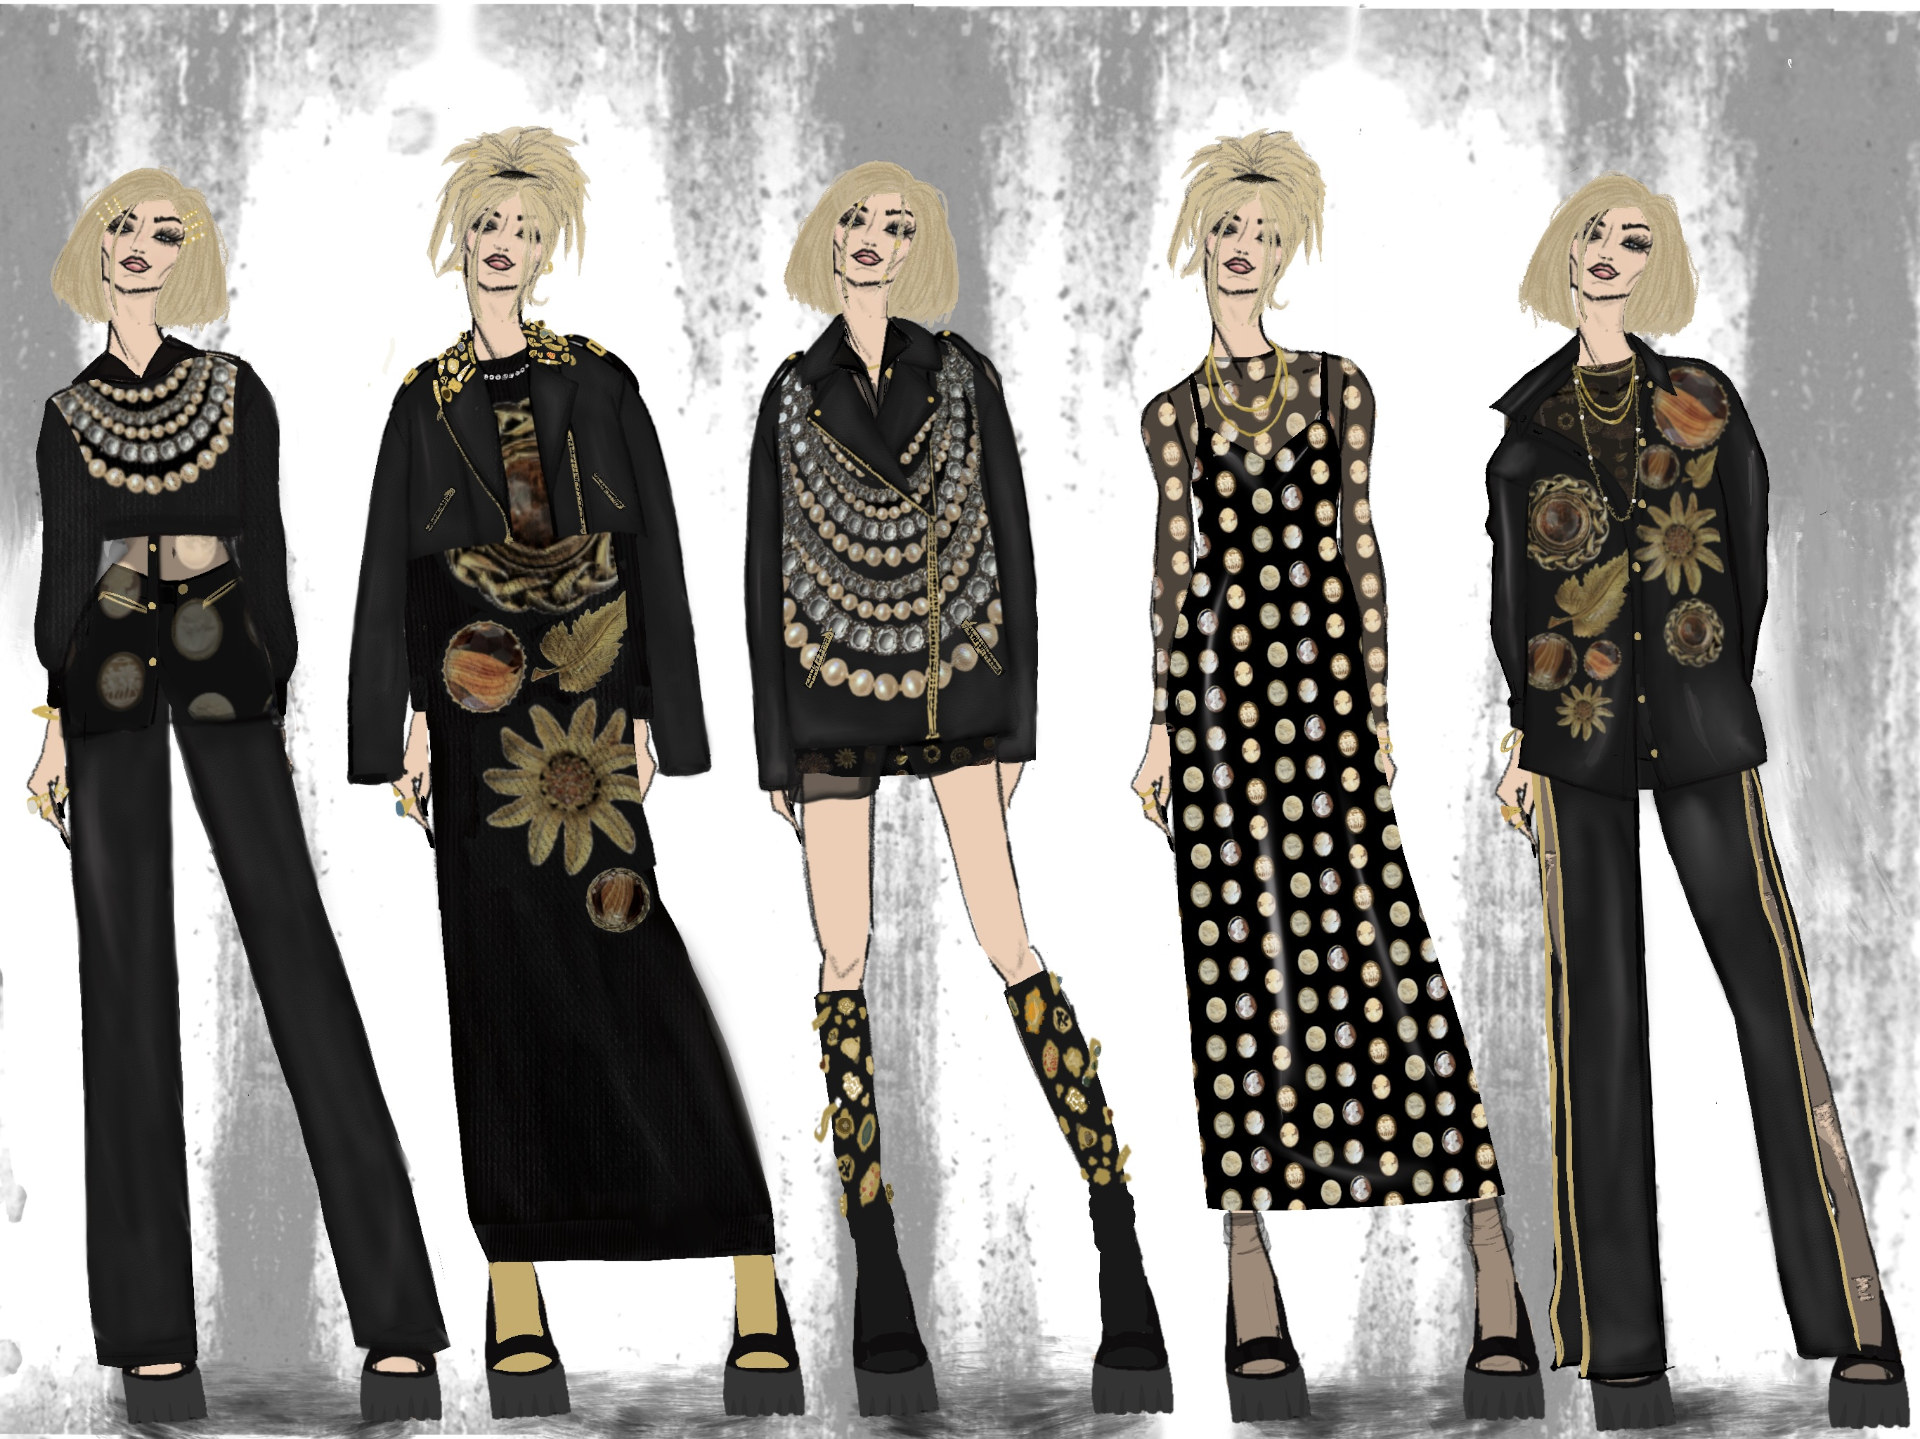 Illustration of five women wearing different black and gold outfit designs